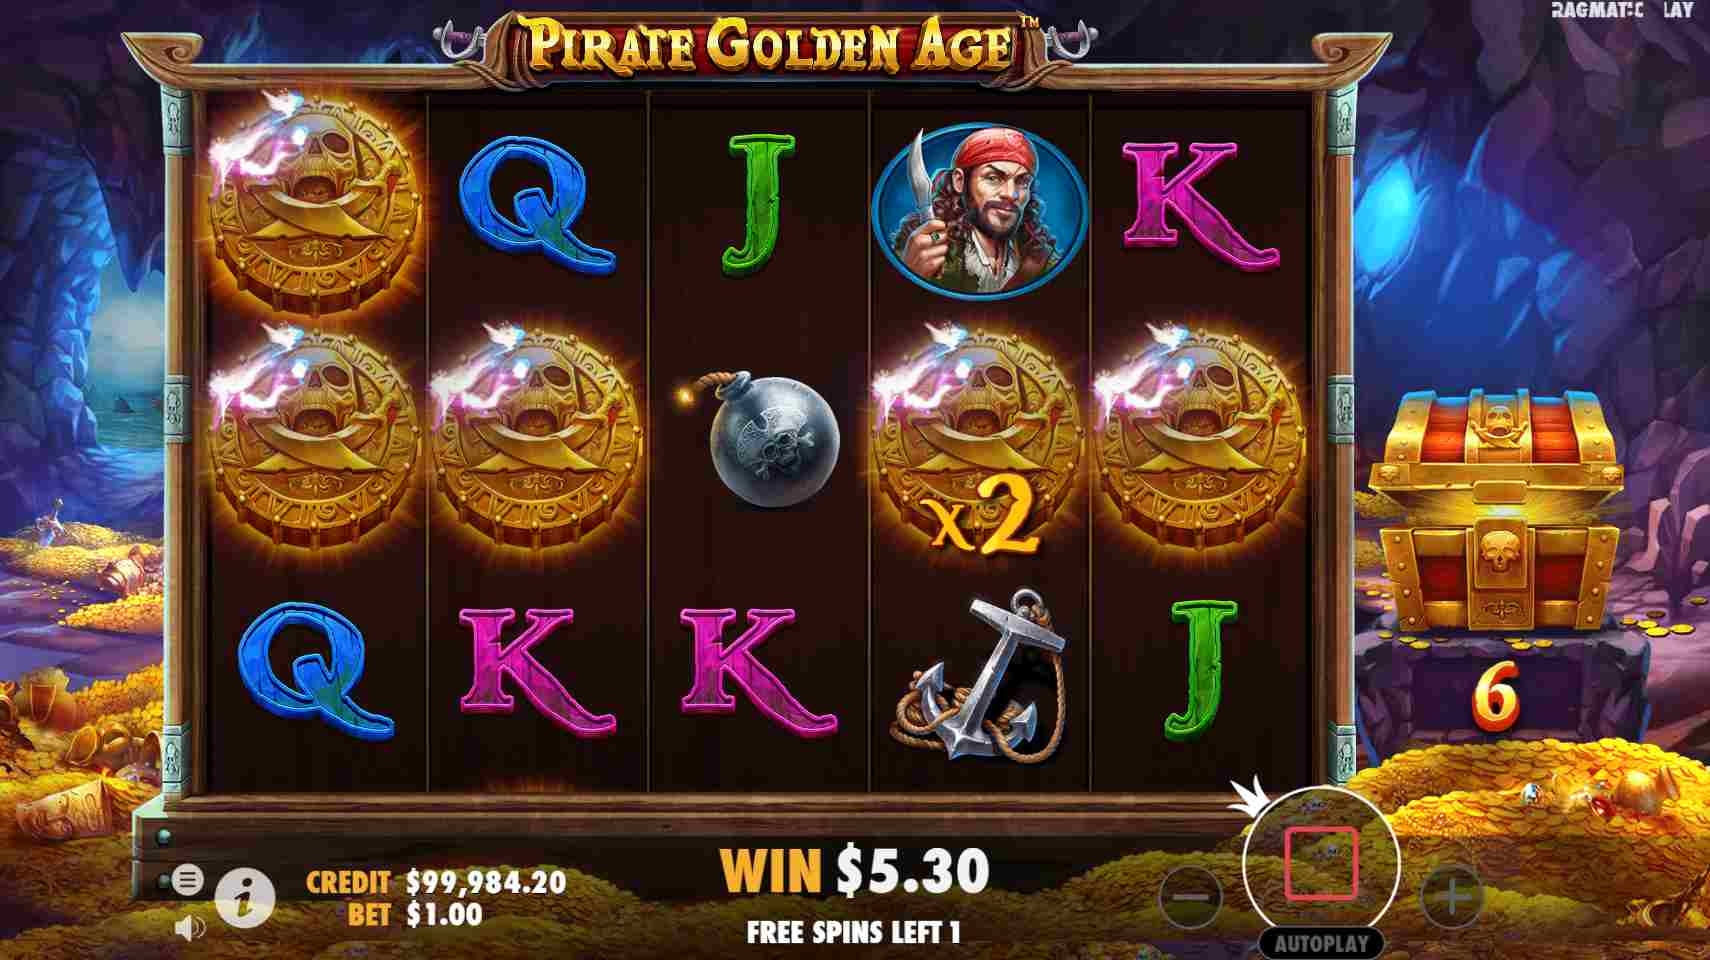 Pirate Golden Age Free Spins